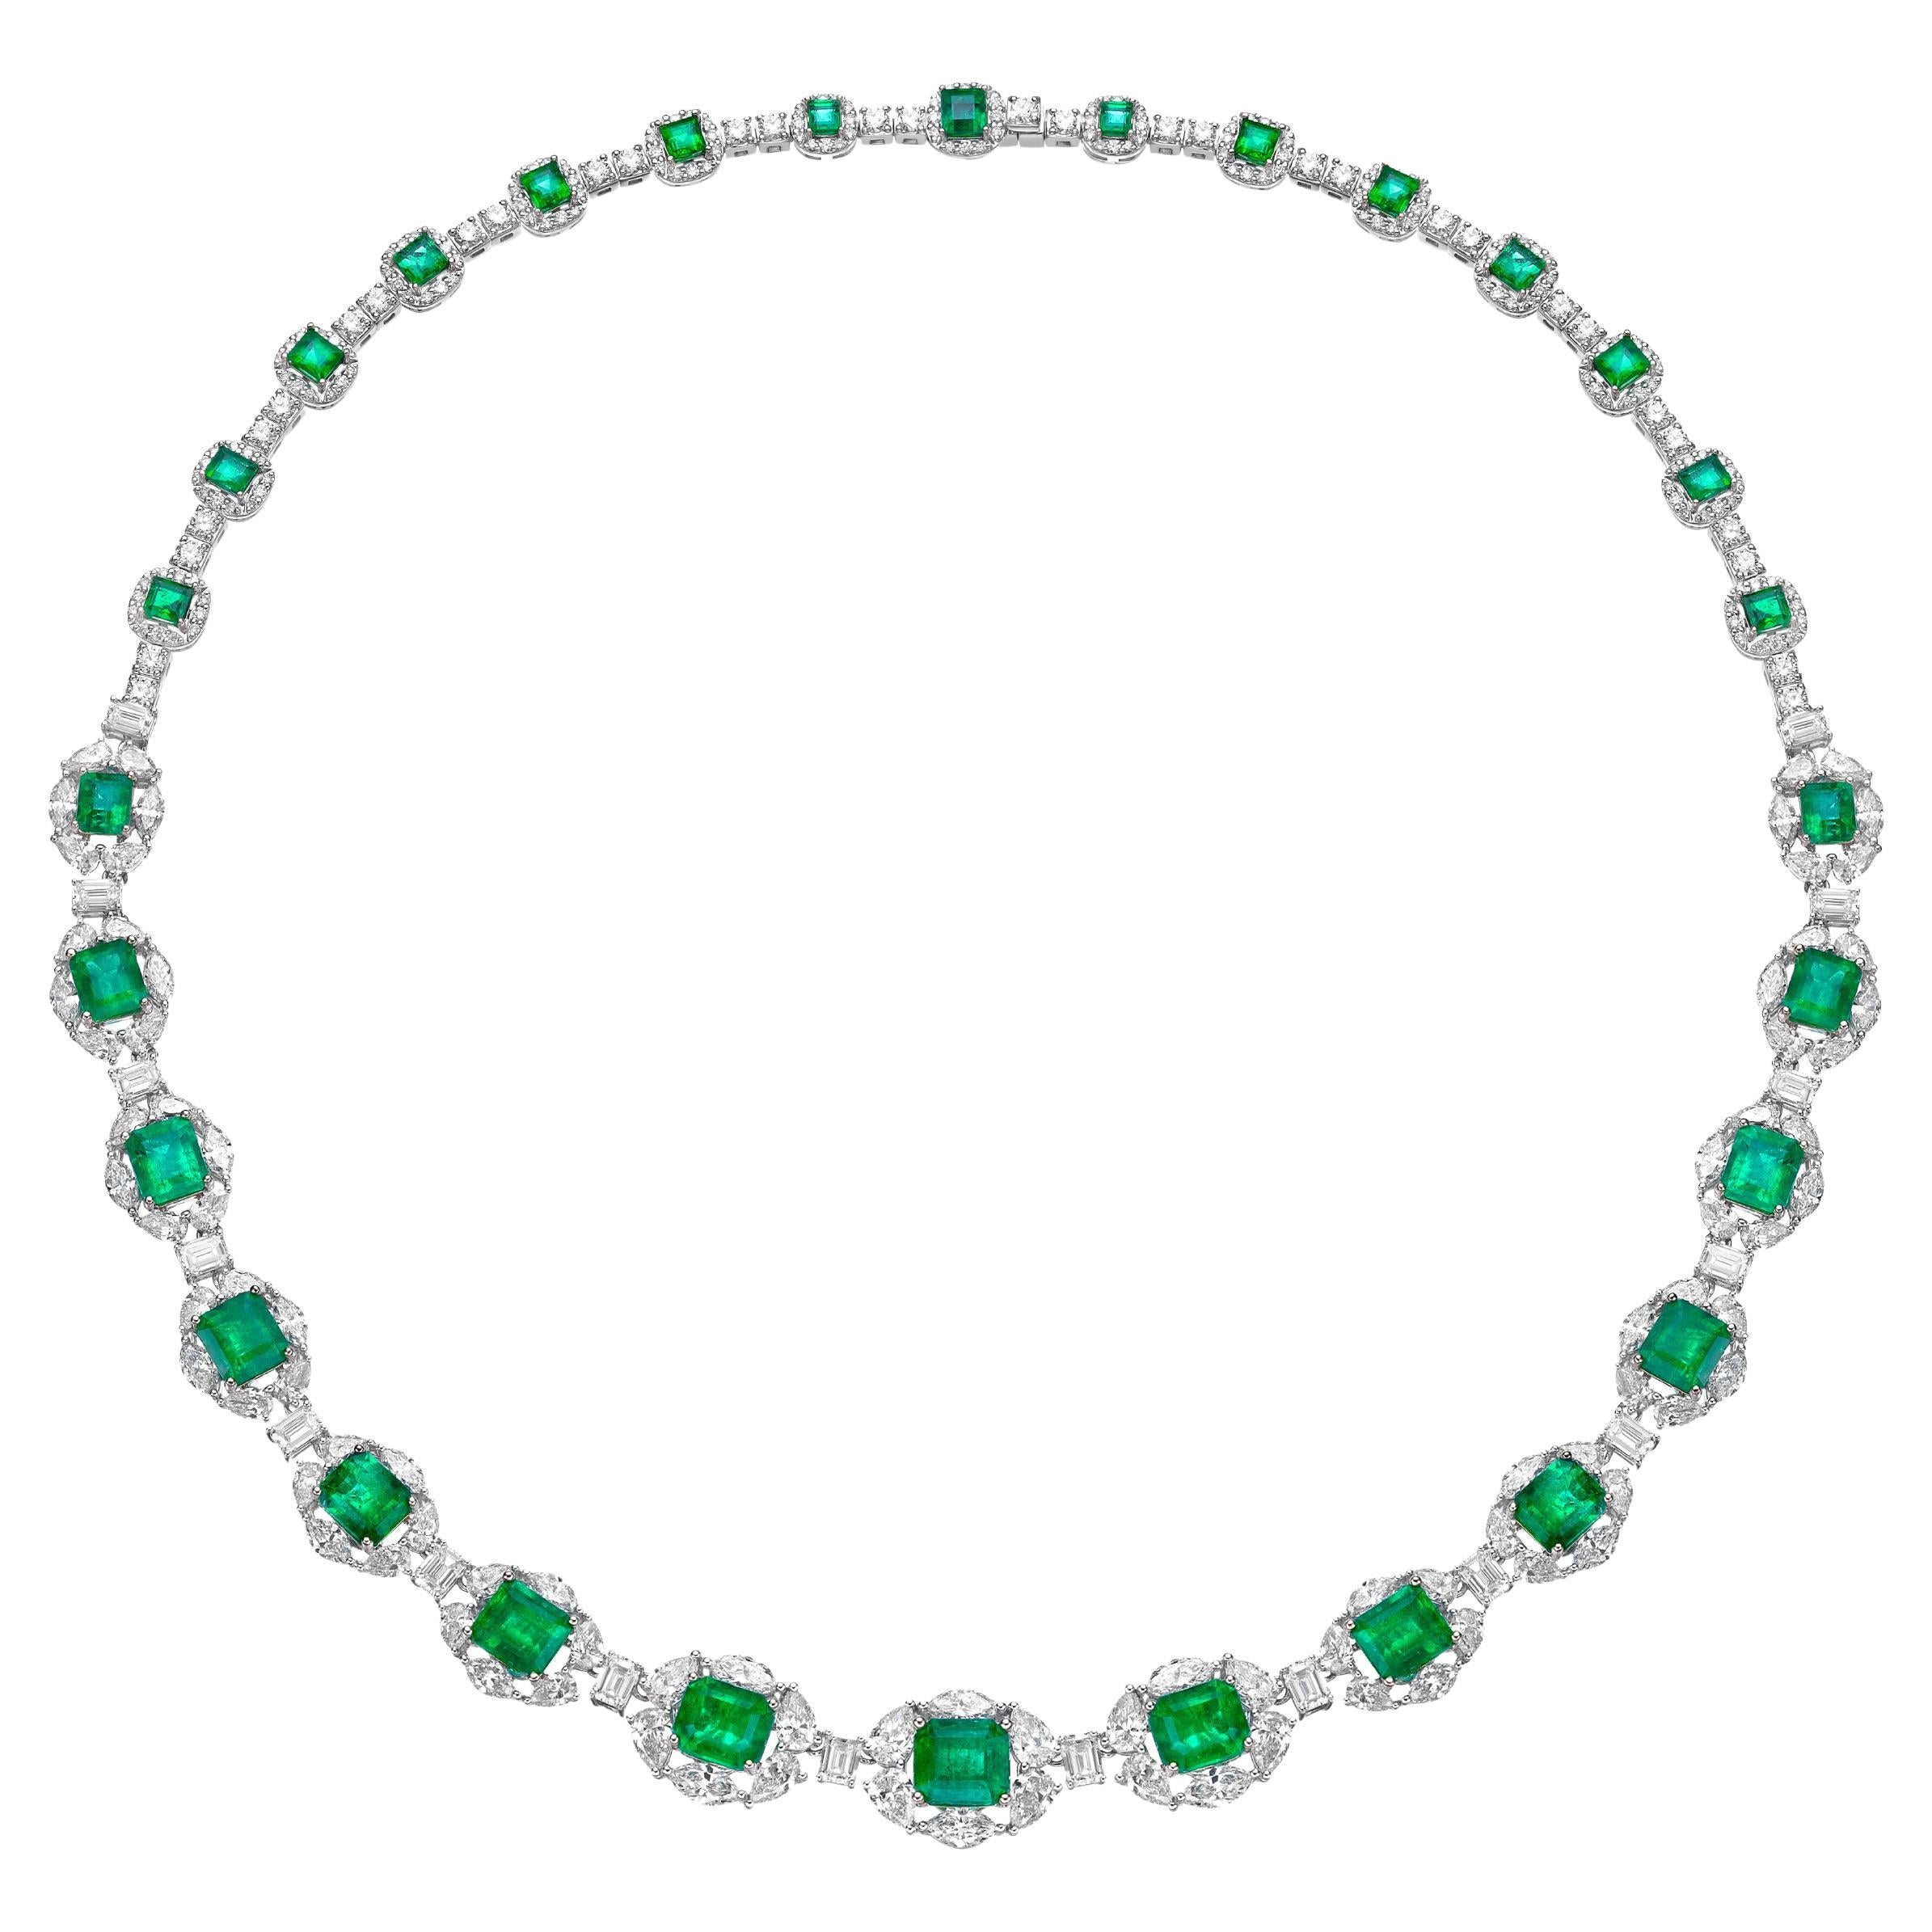 16.63 Carat Emerald Necklace in 18KWYG with White Diamond.